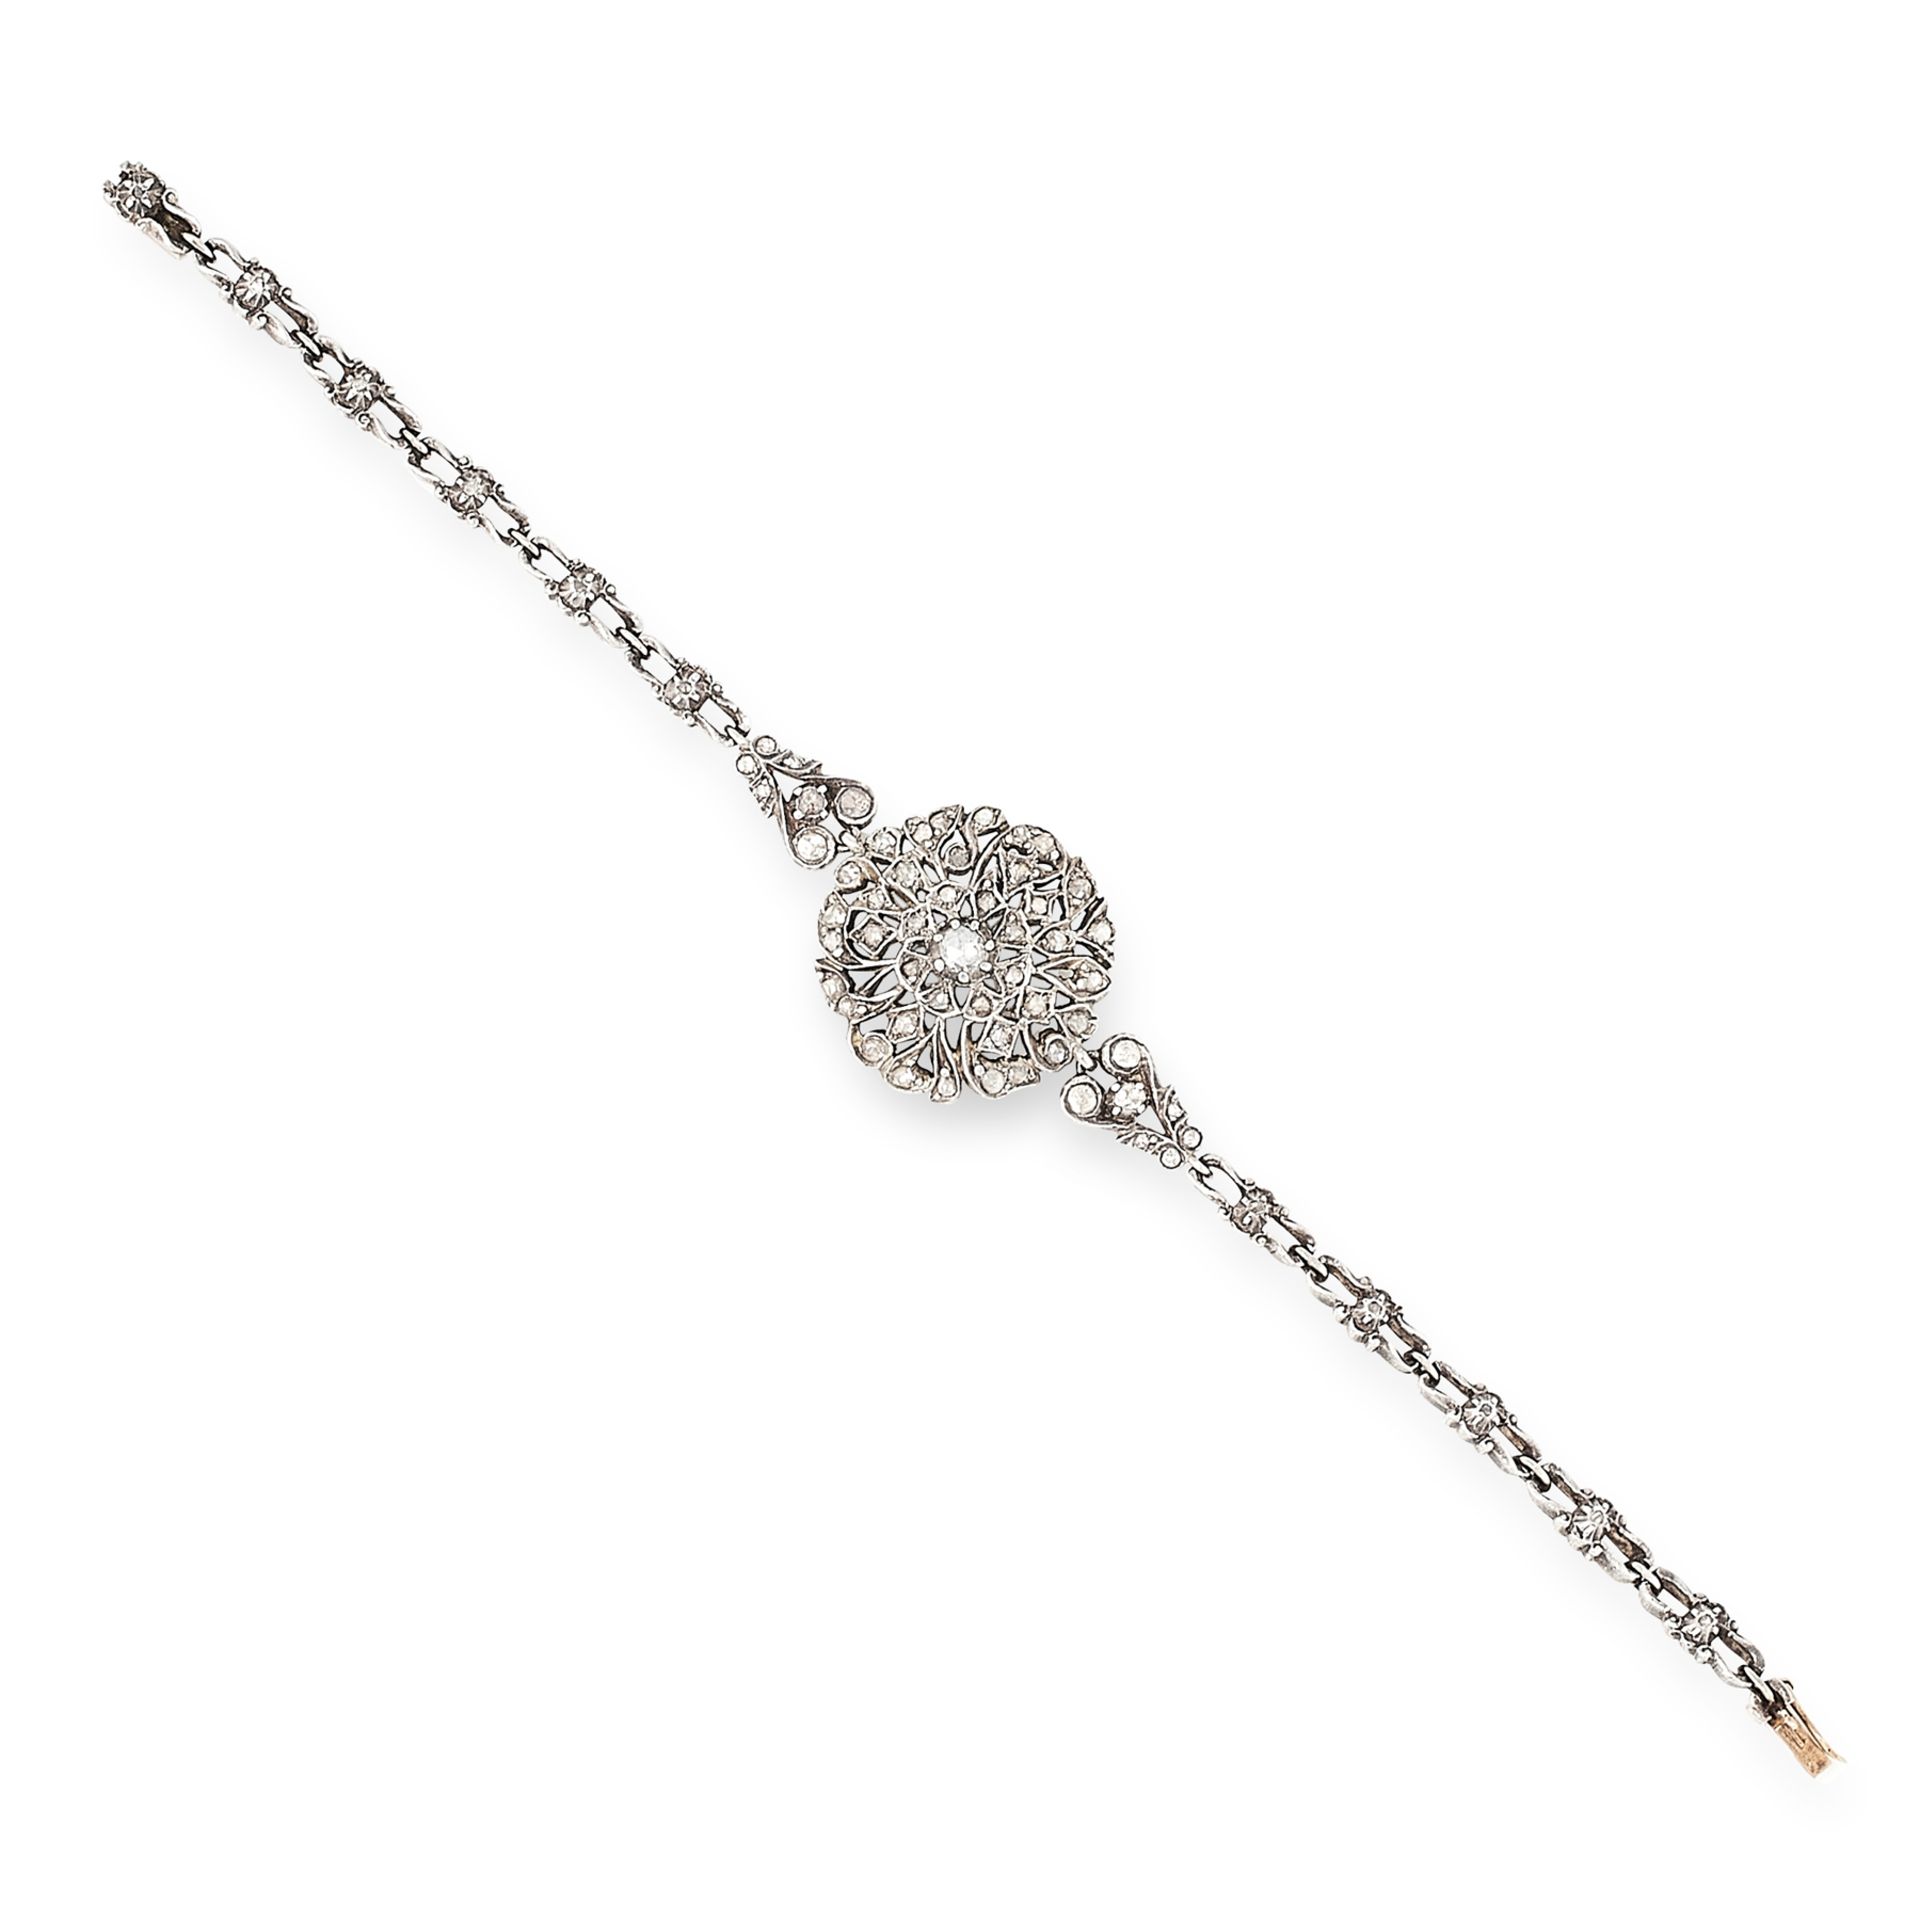 AN ANTIQUE DIAMOND BRACELET, 19TH CENTURY in yellow gold and silver, set with clusters of rose cut